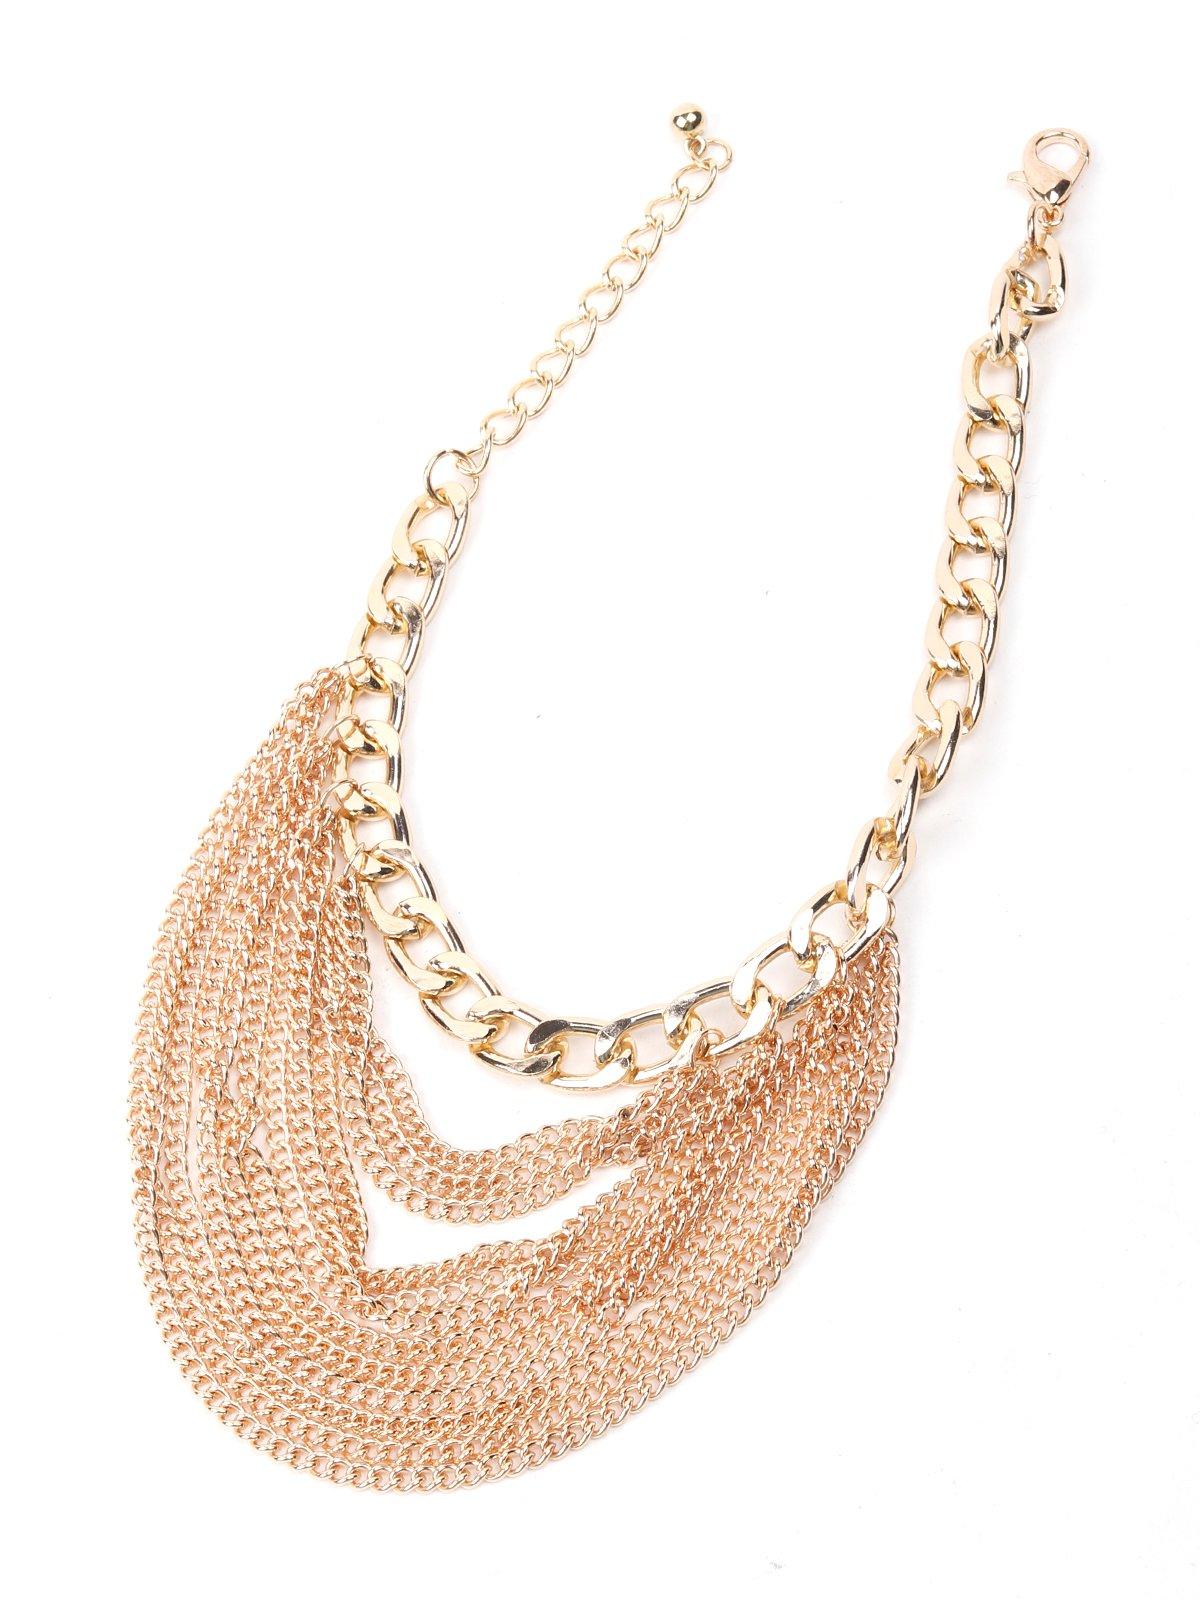 Women's Chunky Gold Tone Necklace - Odette